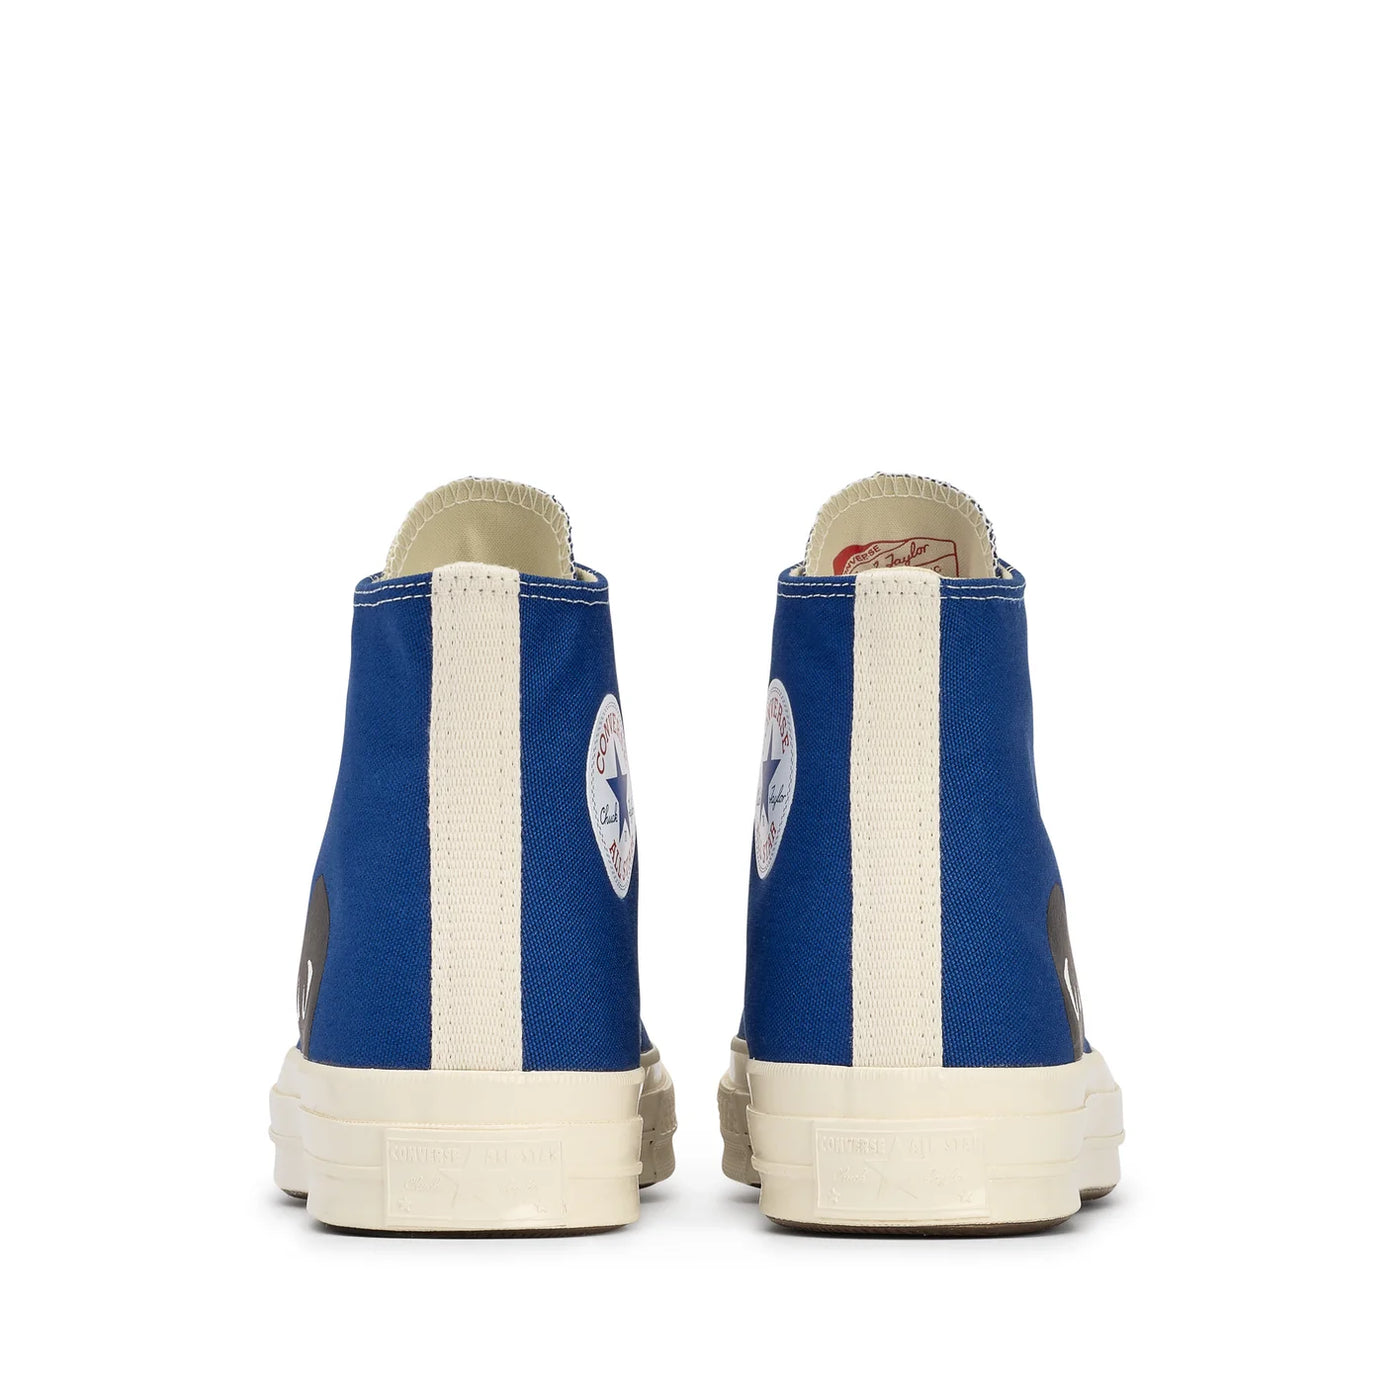 Converse High-Top Sneakers (Blue)